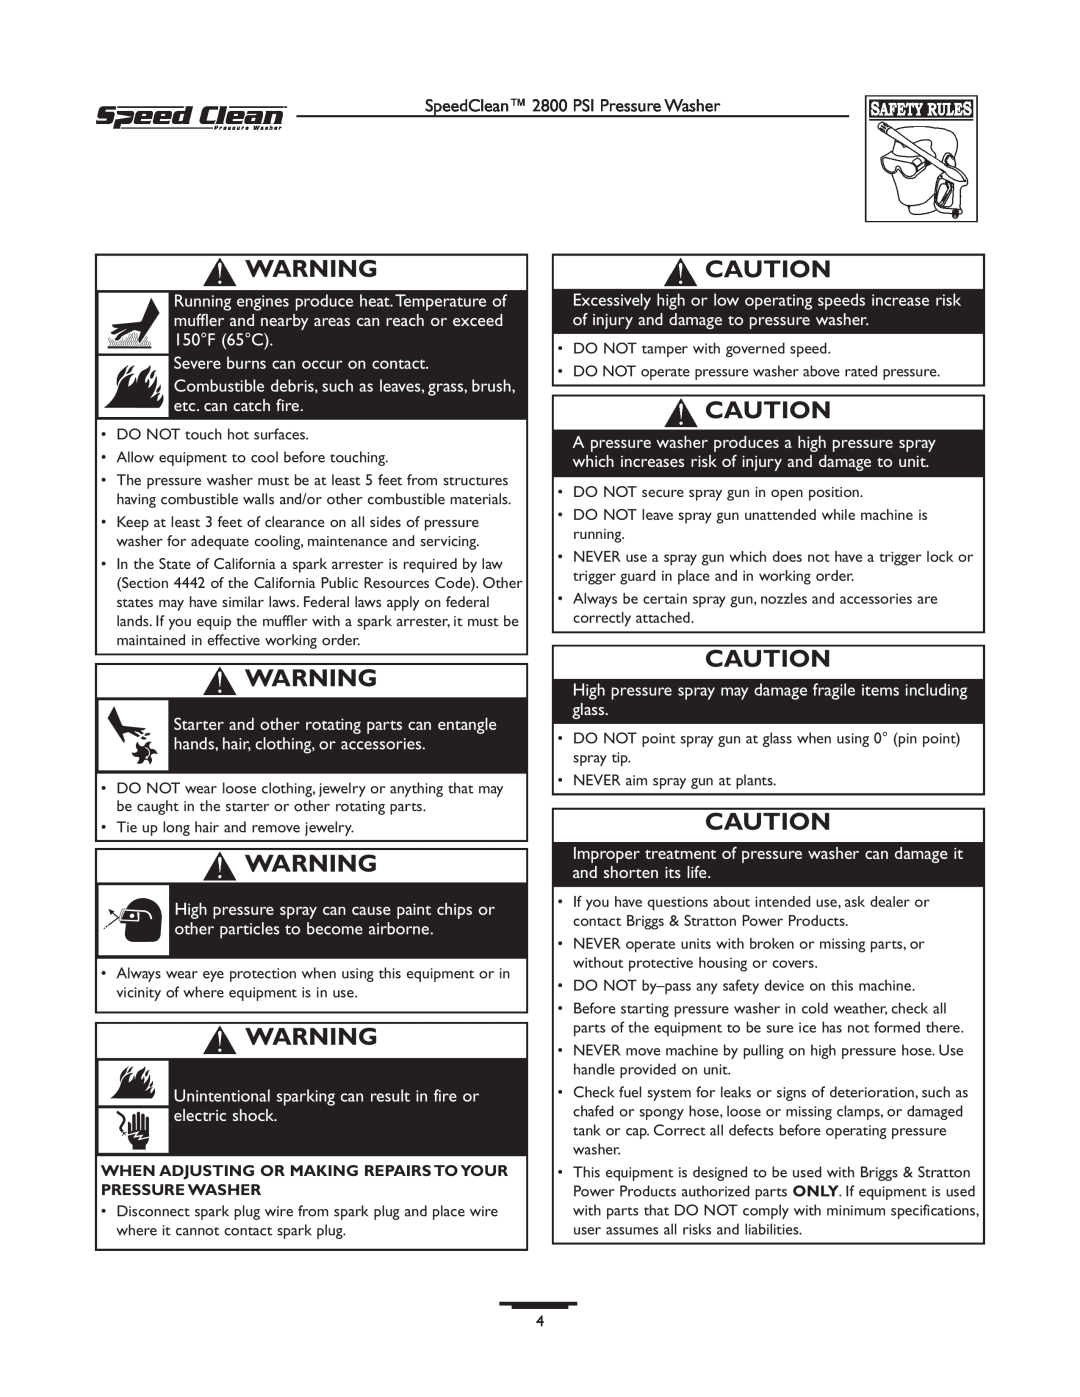 Briggs & Stratton 020212-0 owner manual Severe burns can occur on contact 